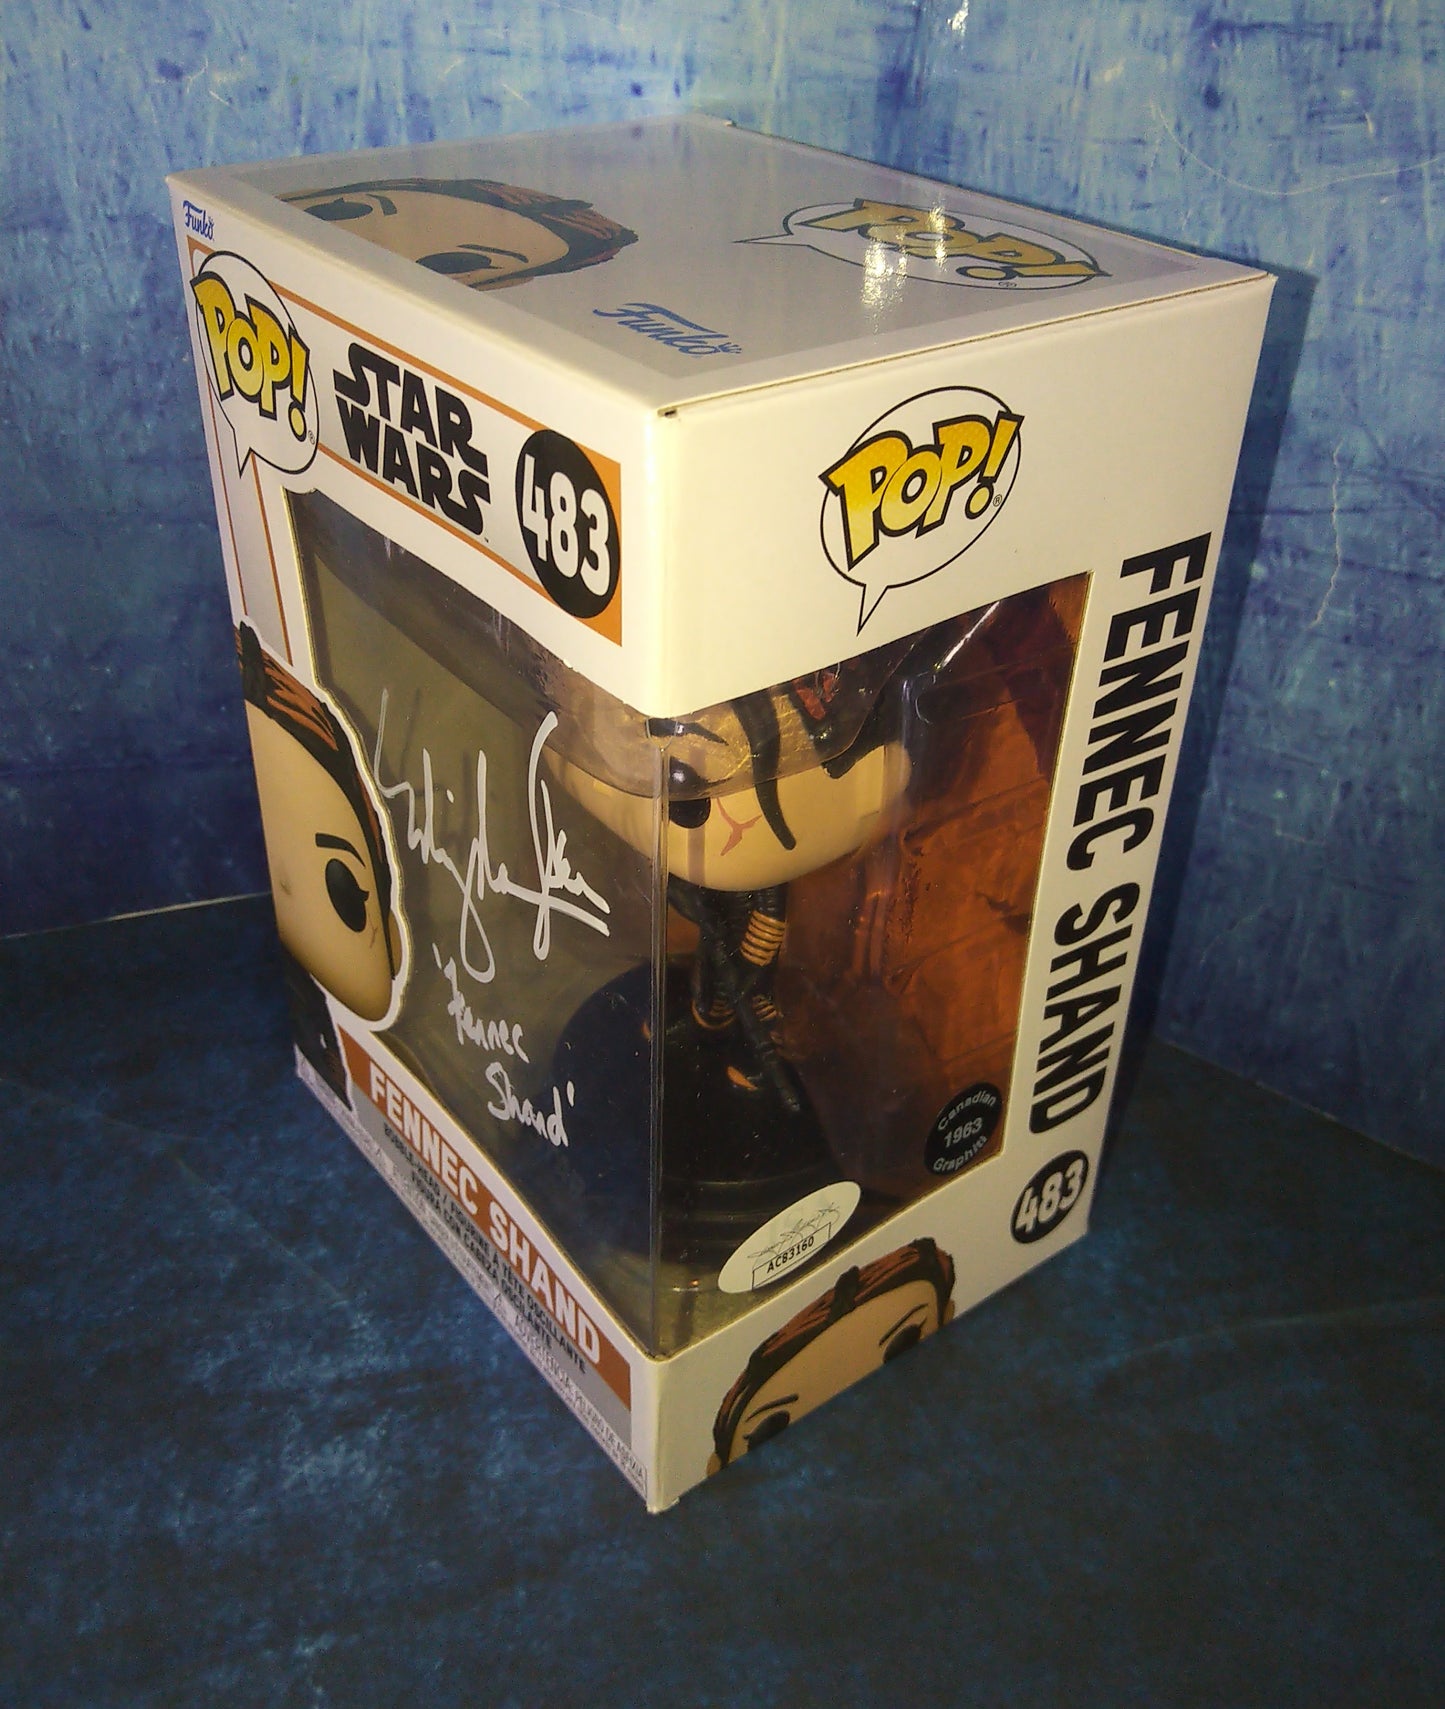 Ming-Na Wen Hand Signed Autograph Fennec Shand Funko Pop